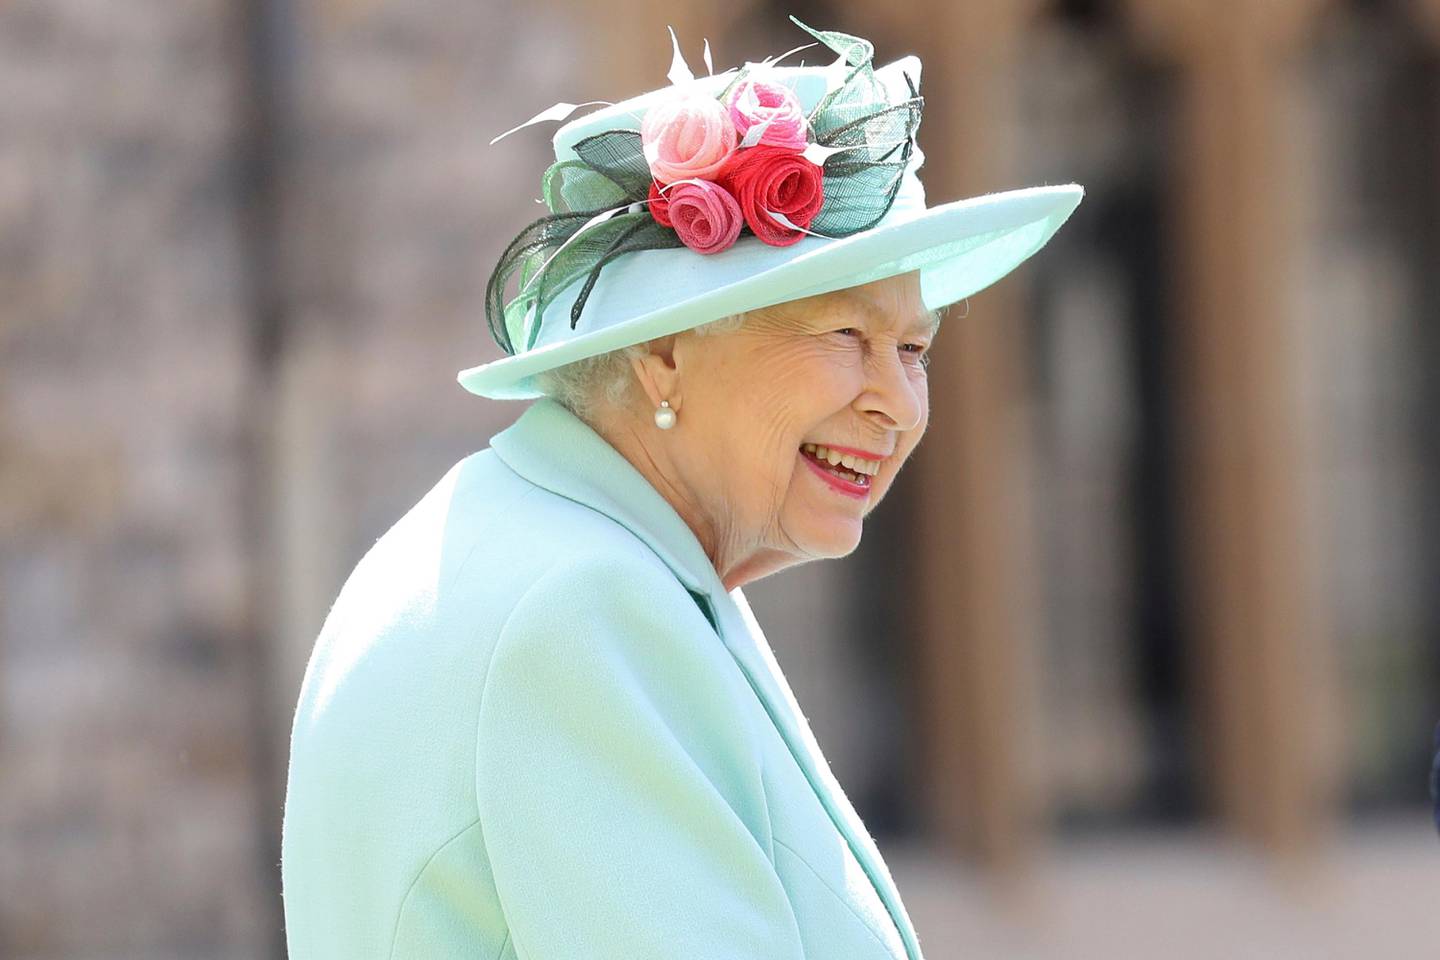 FILE - In this July 17, 2020 file photo, Britain's Queen Elizabeth smiles after awarding Captain Sir Thomas Moore his knighthood during a ceremony at Windsor Castle in Windsor, England. The former British colony of Barbador, once known as Little England, announced Tuesday, Sept. 15, that it plans to replace the monarch with its own head of state in time for next years 55th independence anniversary. (AP Photo/Chris Jackson, File)